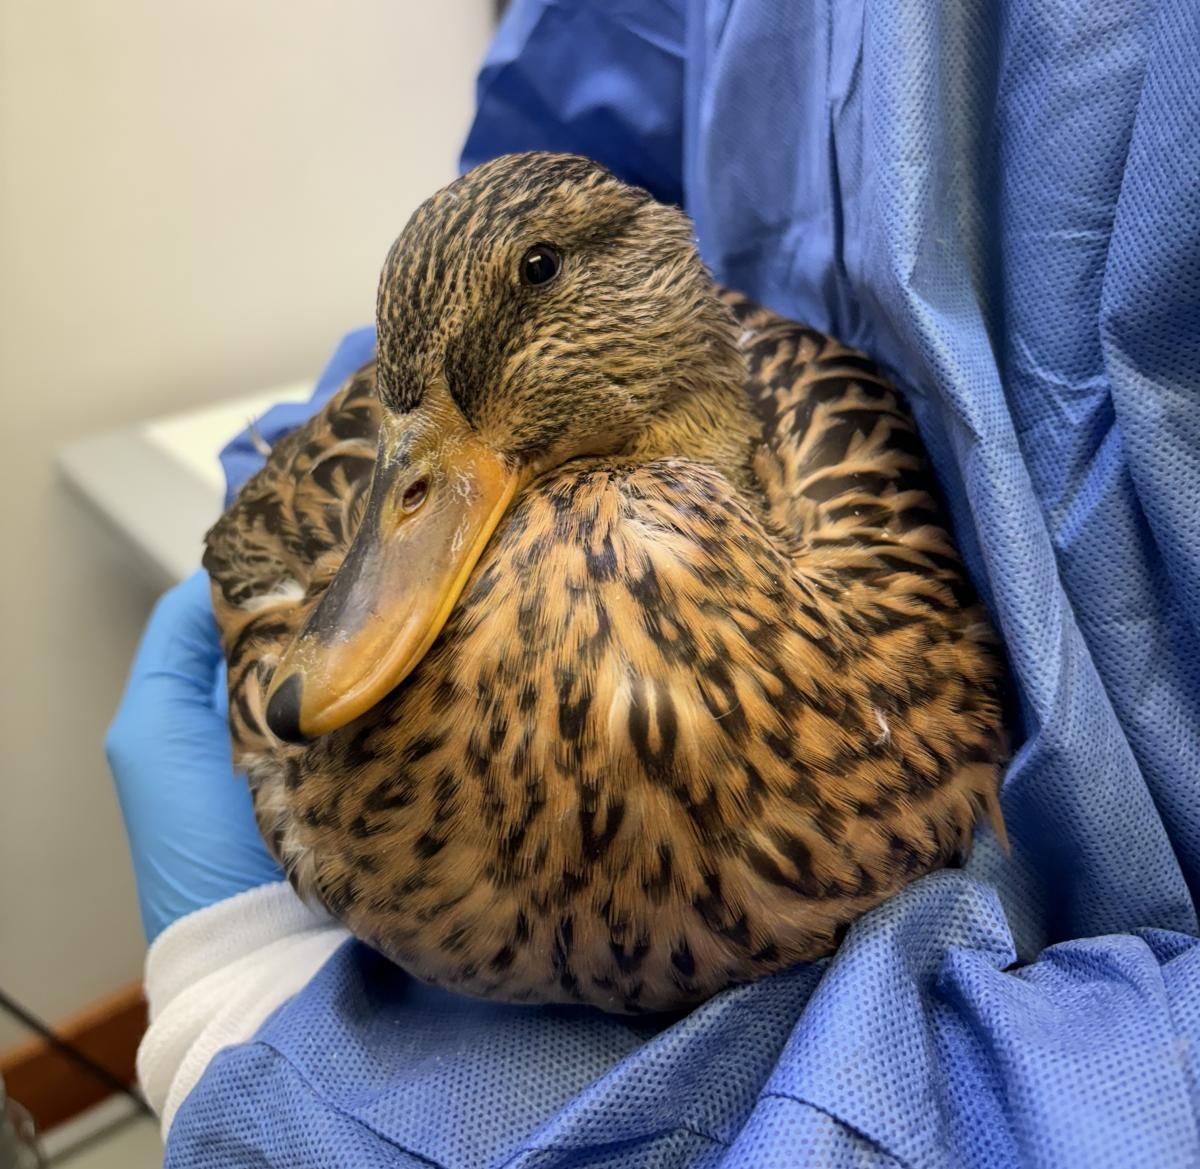 This Mallard duck, a current patient at our hospital, was found to have high levels of lead in its system and showed clear signs of habituation towards humans. Are the two connected? Click the picture to read what our veterinarians think! buff.ly/3v0kcKE